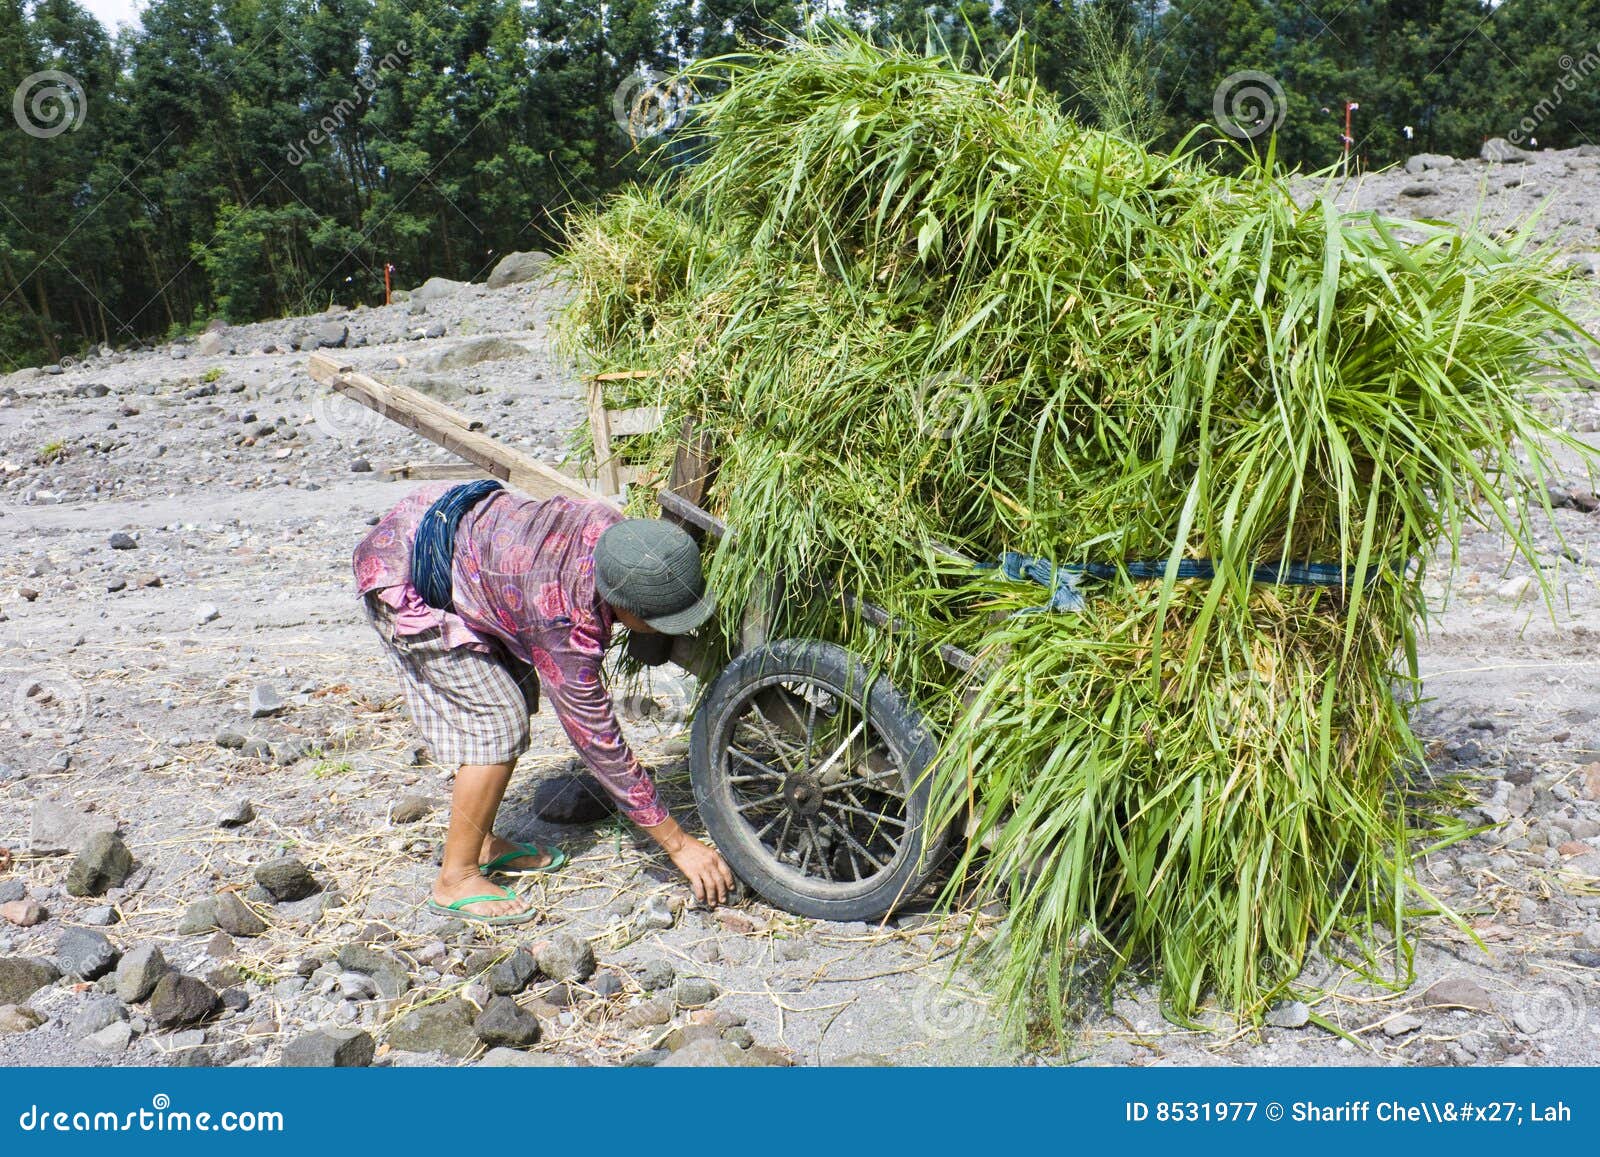  - grass-collecting-mount-merapi-indonesia-8531977